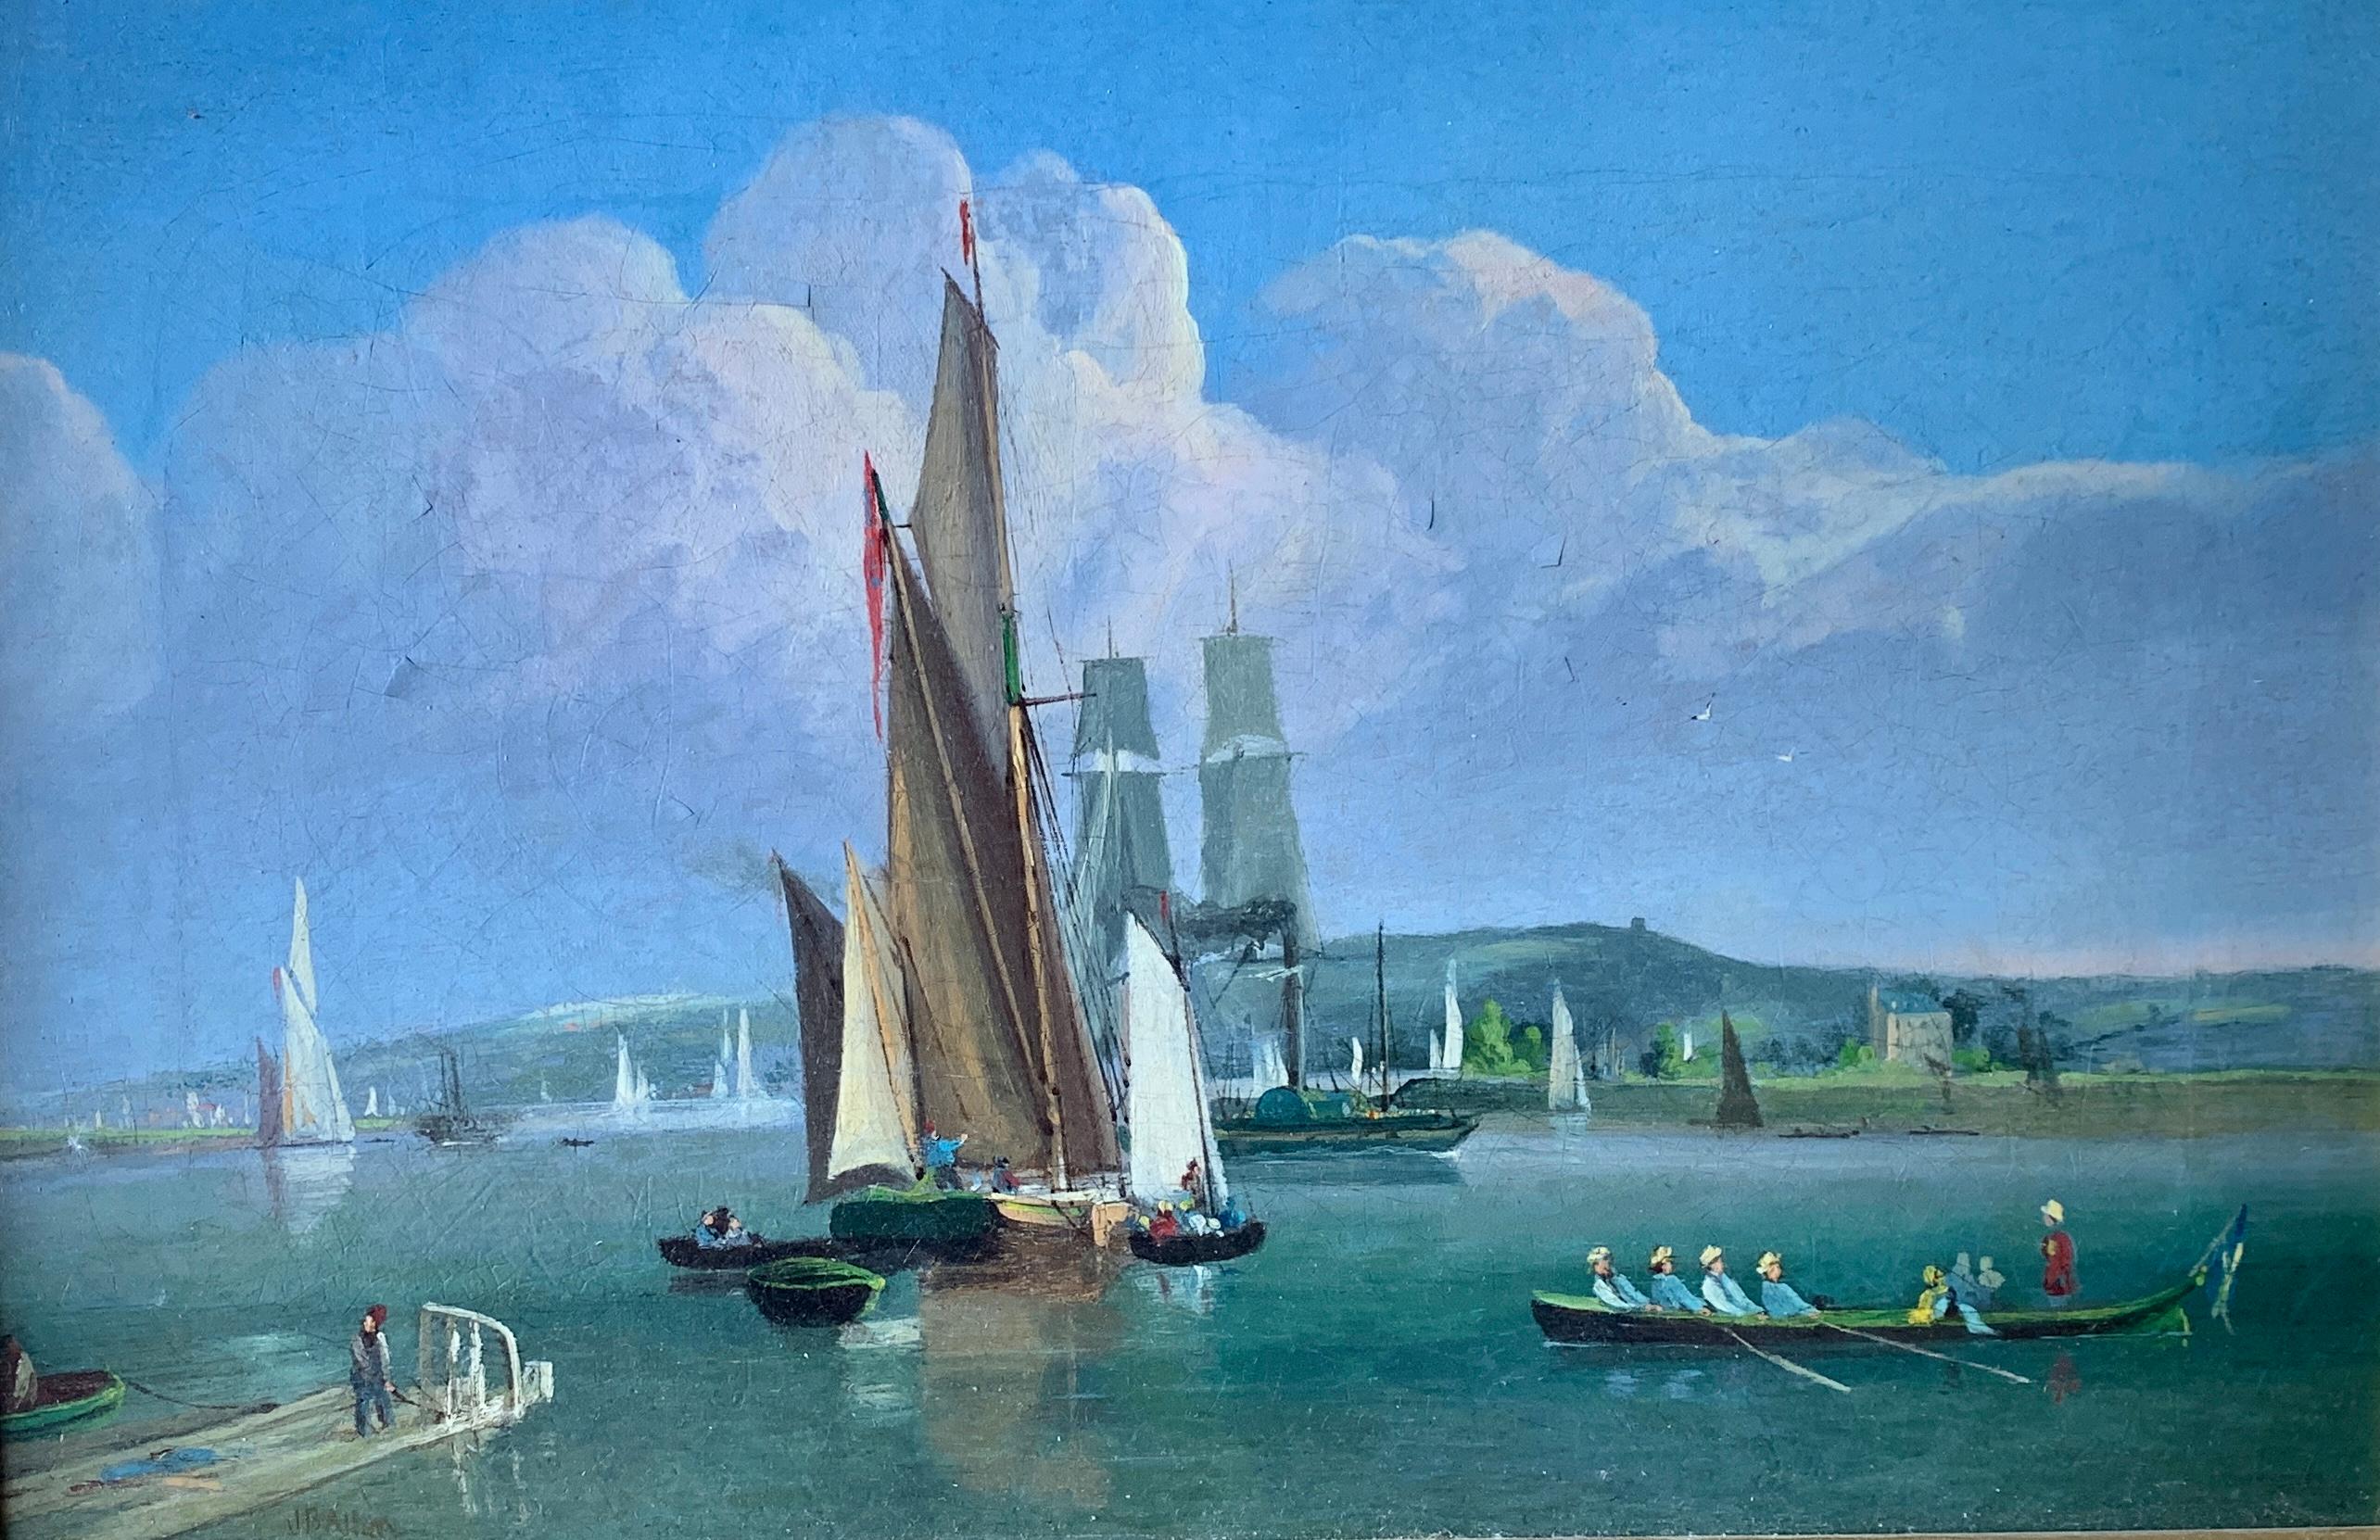 19th century English Boats on a river with sailing, rowing and a paddle boat - Painting by Unknown